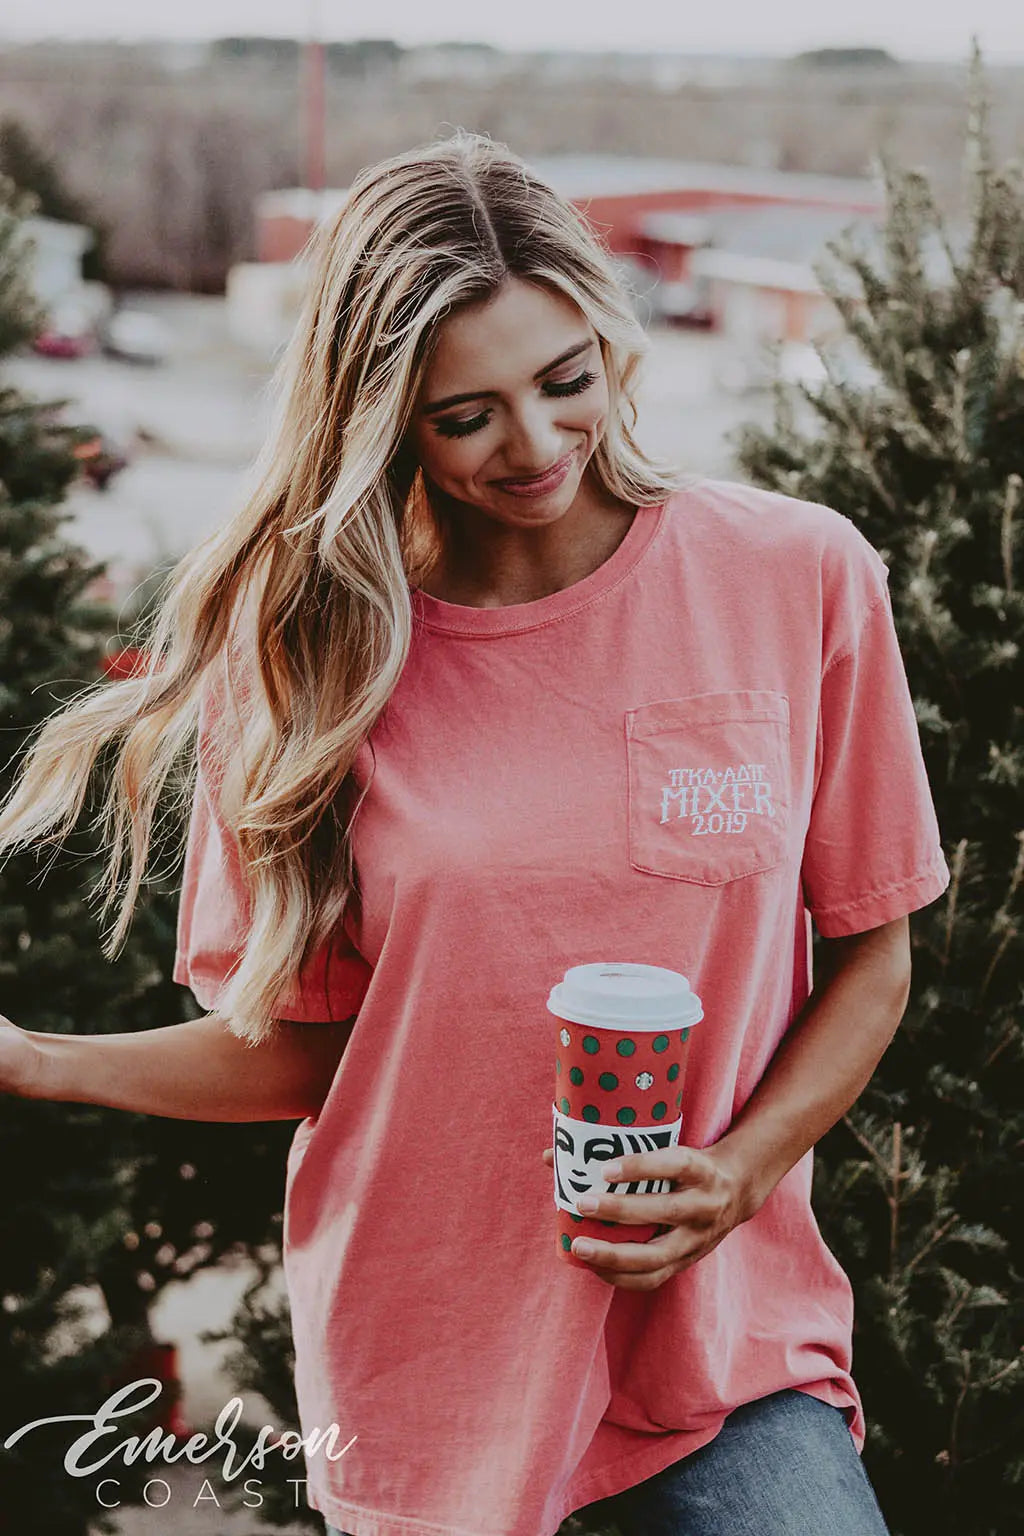 Girl wears a red shirt with Pike and ADPi letters on the left pocket.